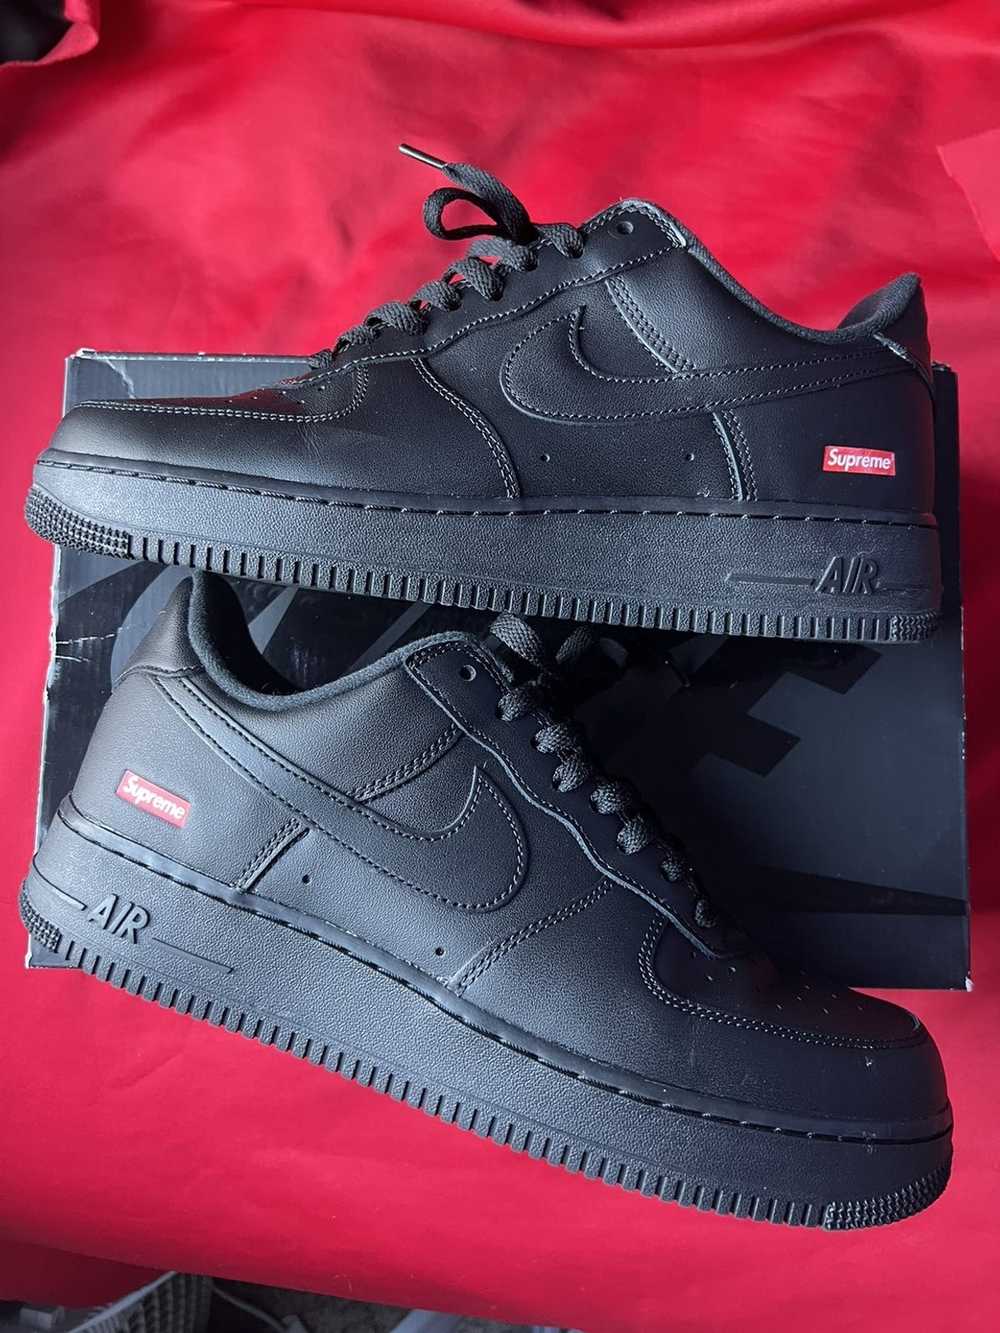 Supreme x Nike Air Force 1 'Black' Poster — Sneakers Illustrated